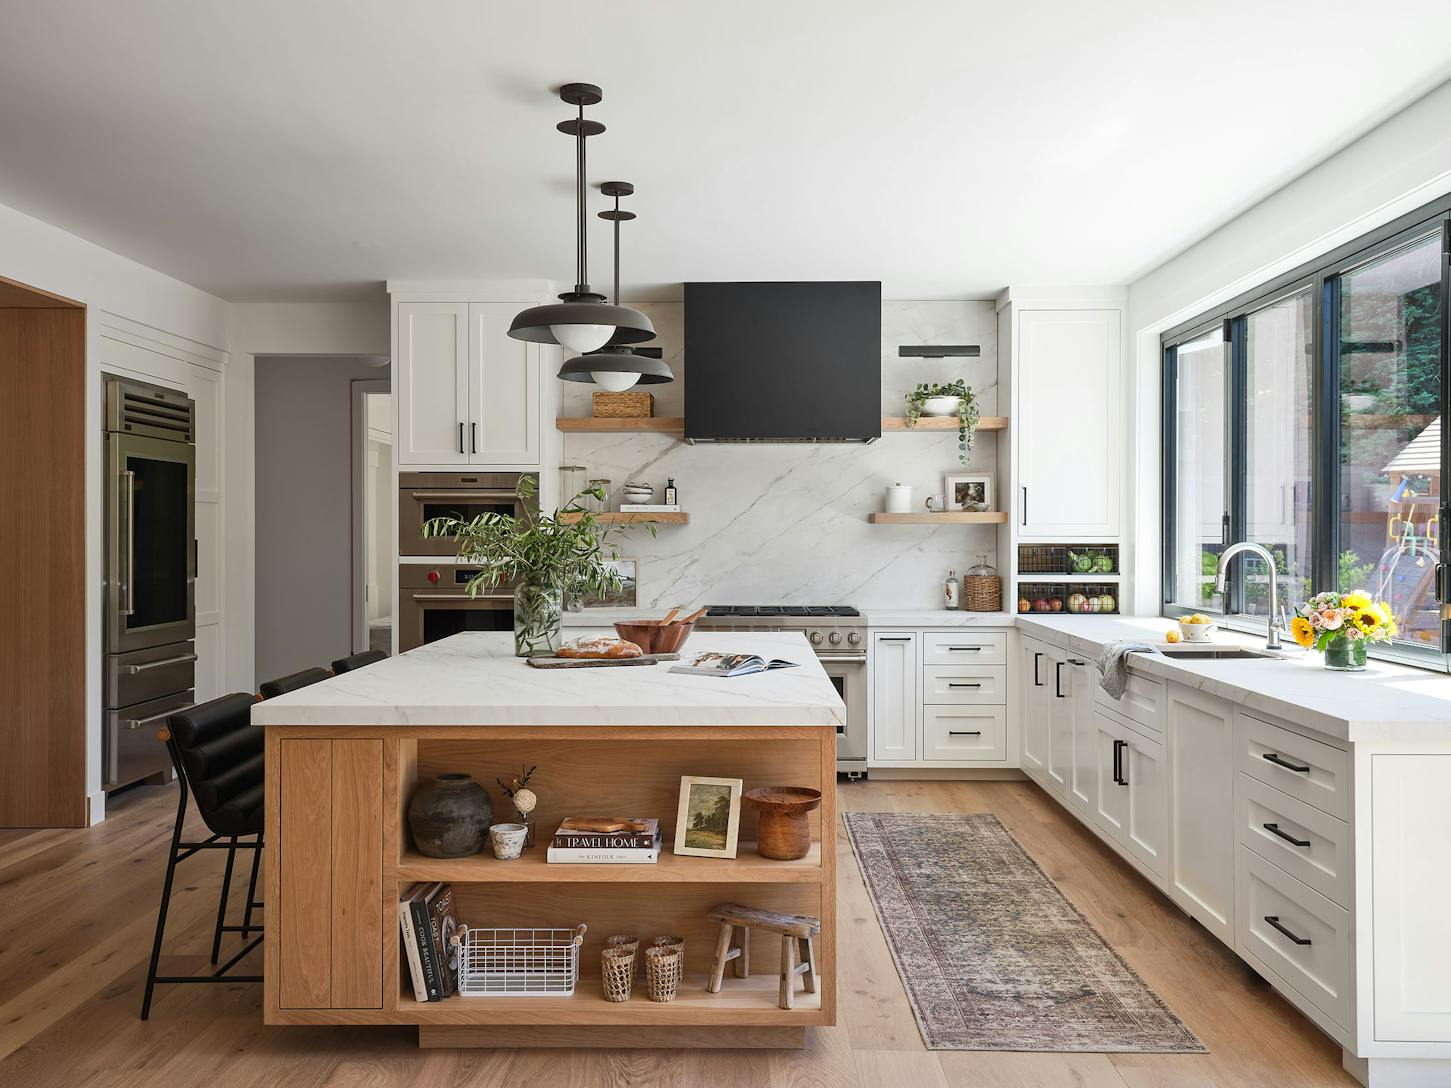 A modern kitchen with wood floors, a center island, and a window/door combination designed for a modern indoor outdoor kitchen